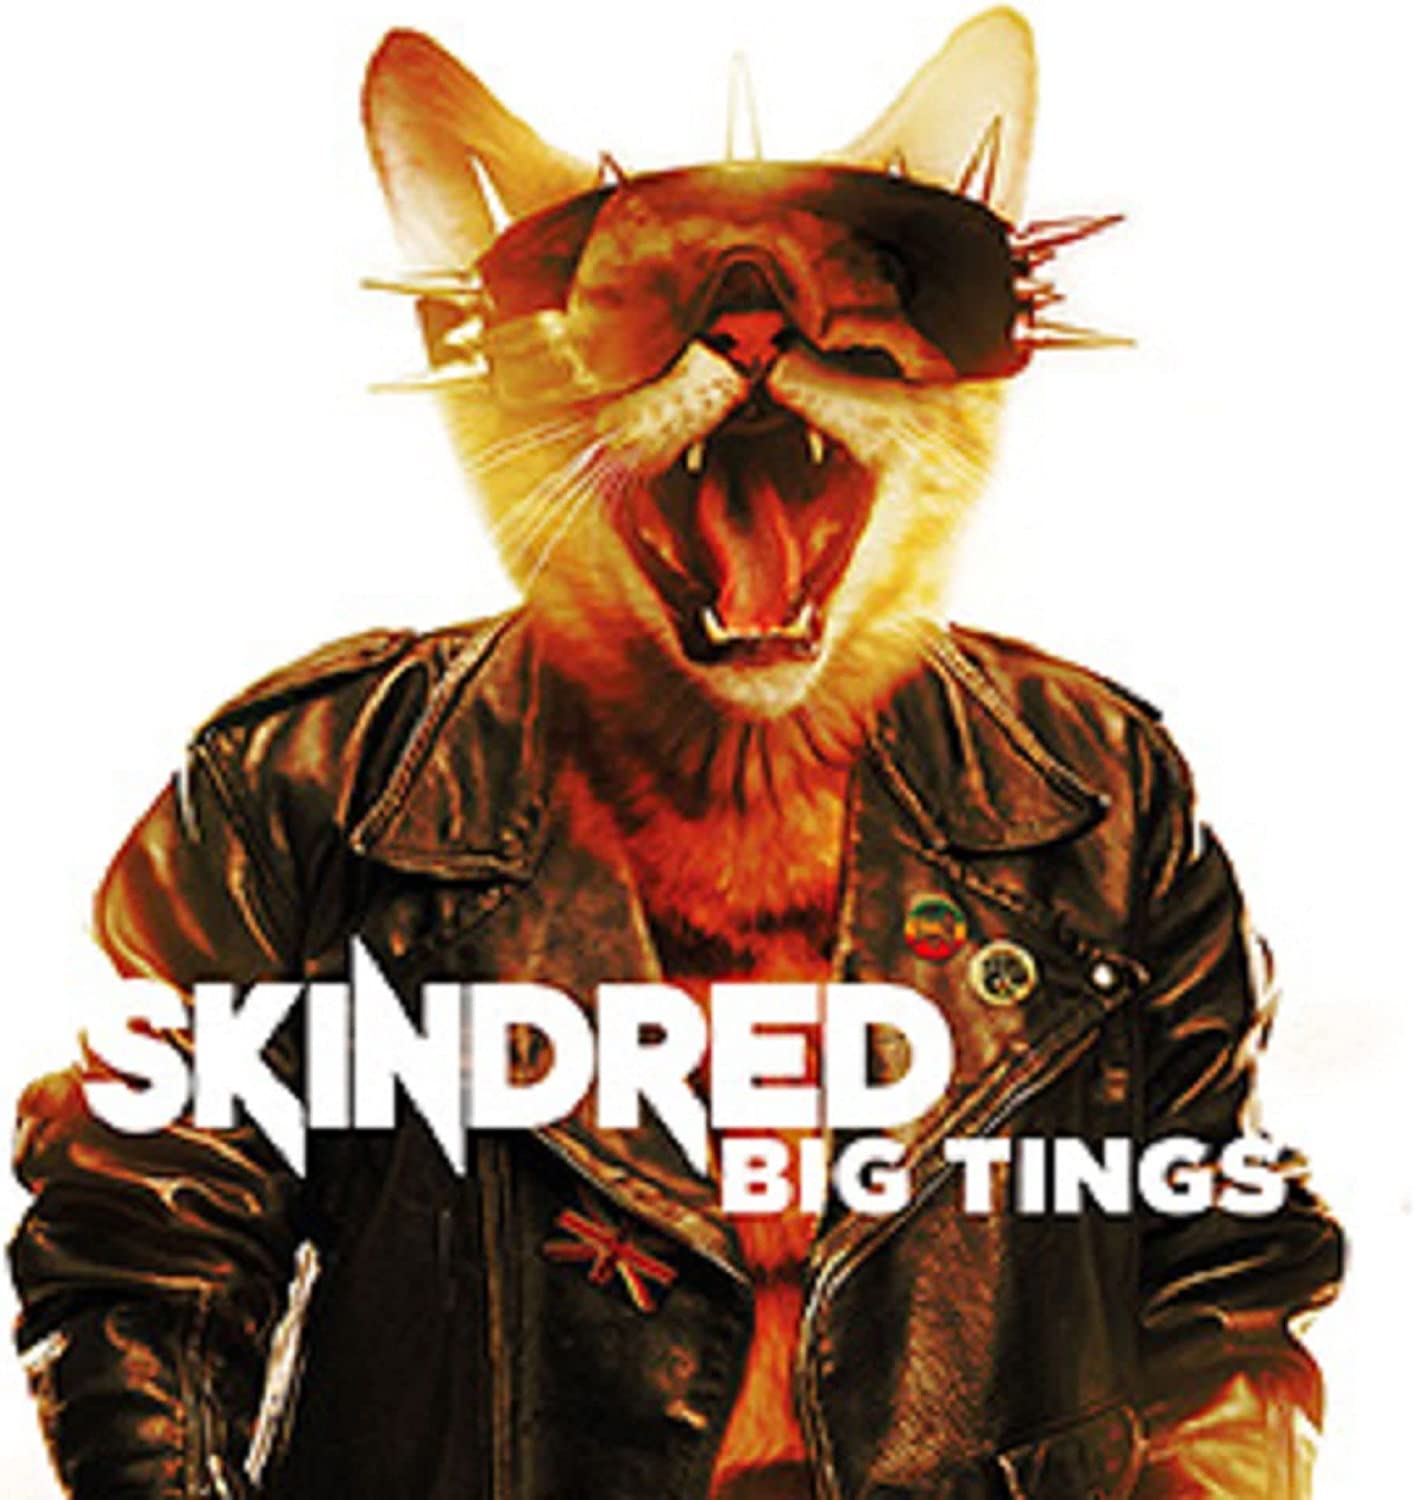 Skindred "Big Tings" CD